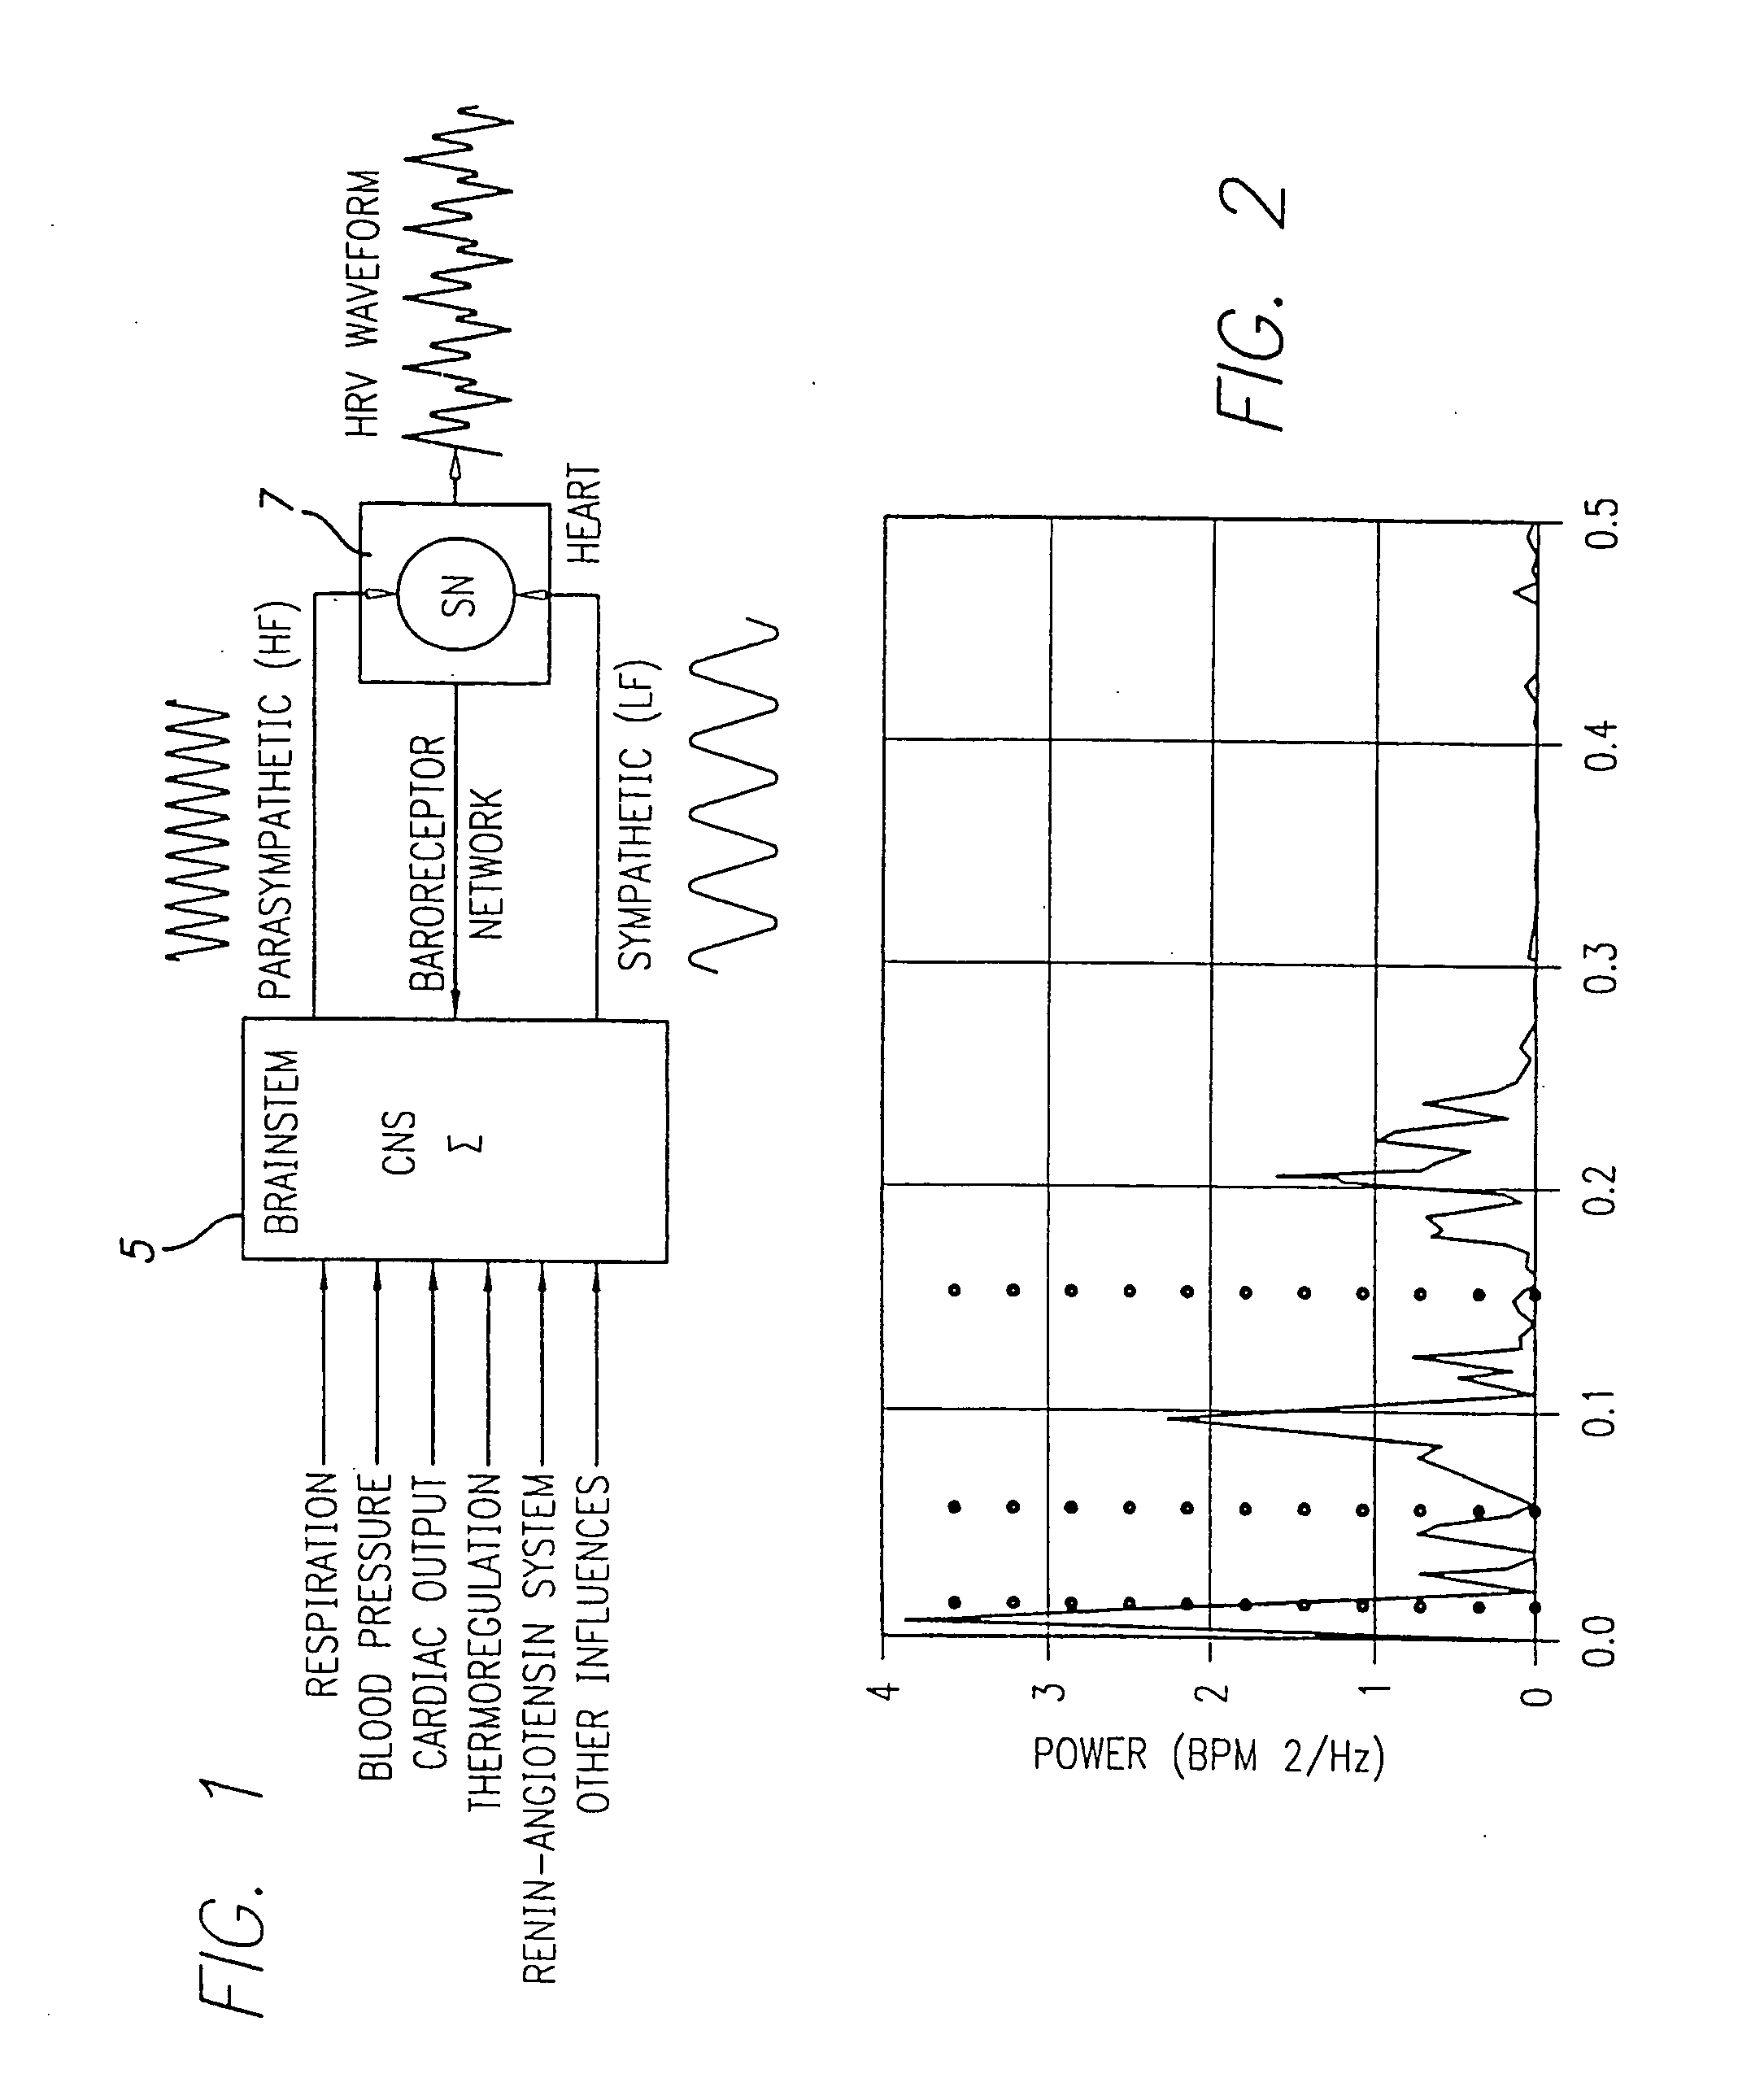 Method and apparatus for facilitating physiological coherence and autonomic balance